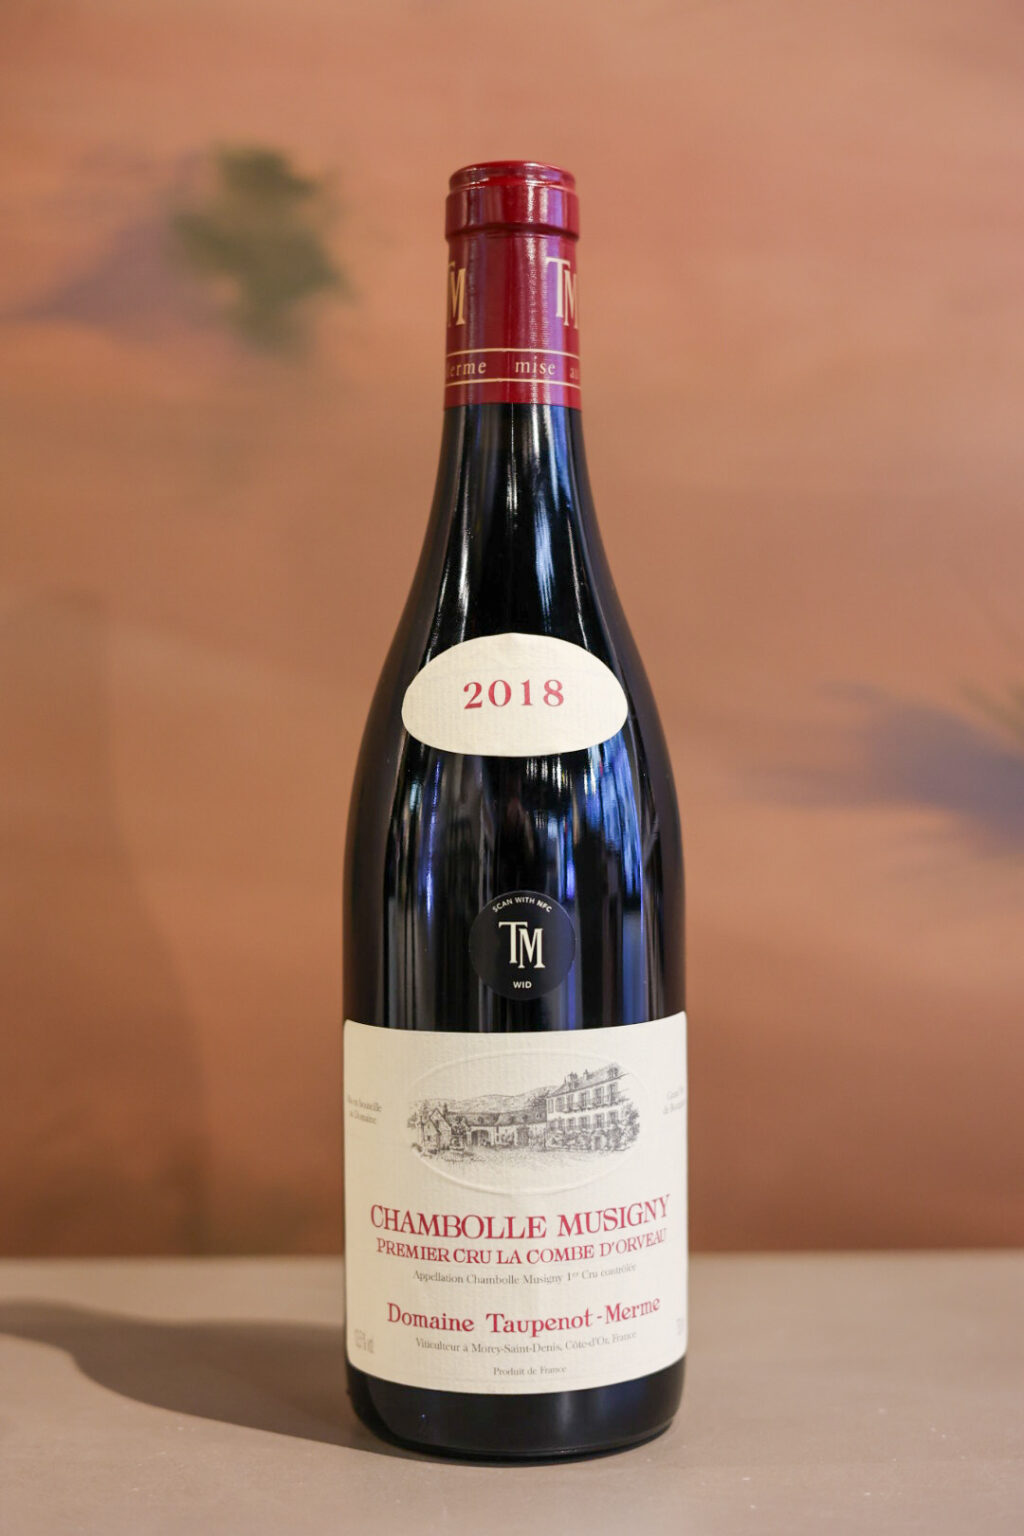 Domaine Taupenot-Merme Chambolle La Combe d’arveao